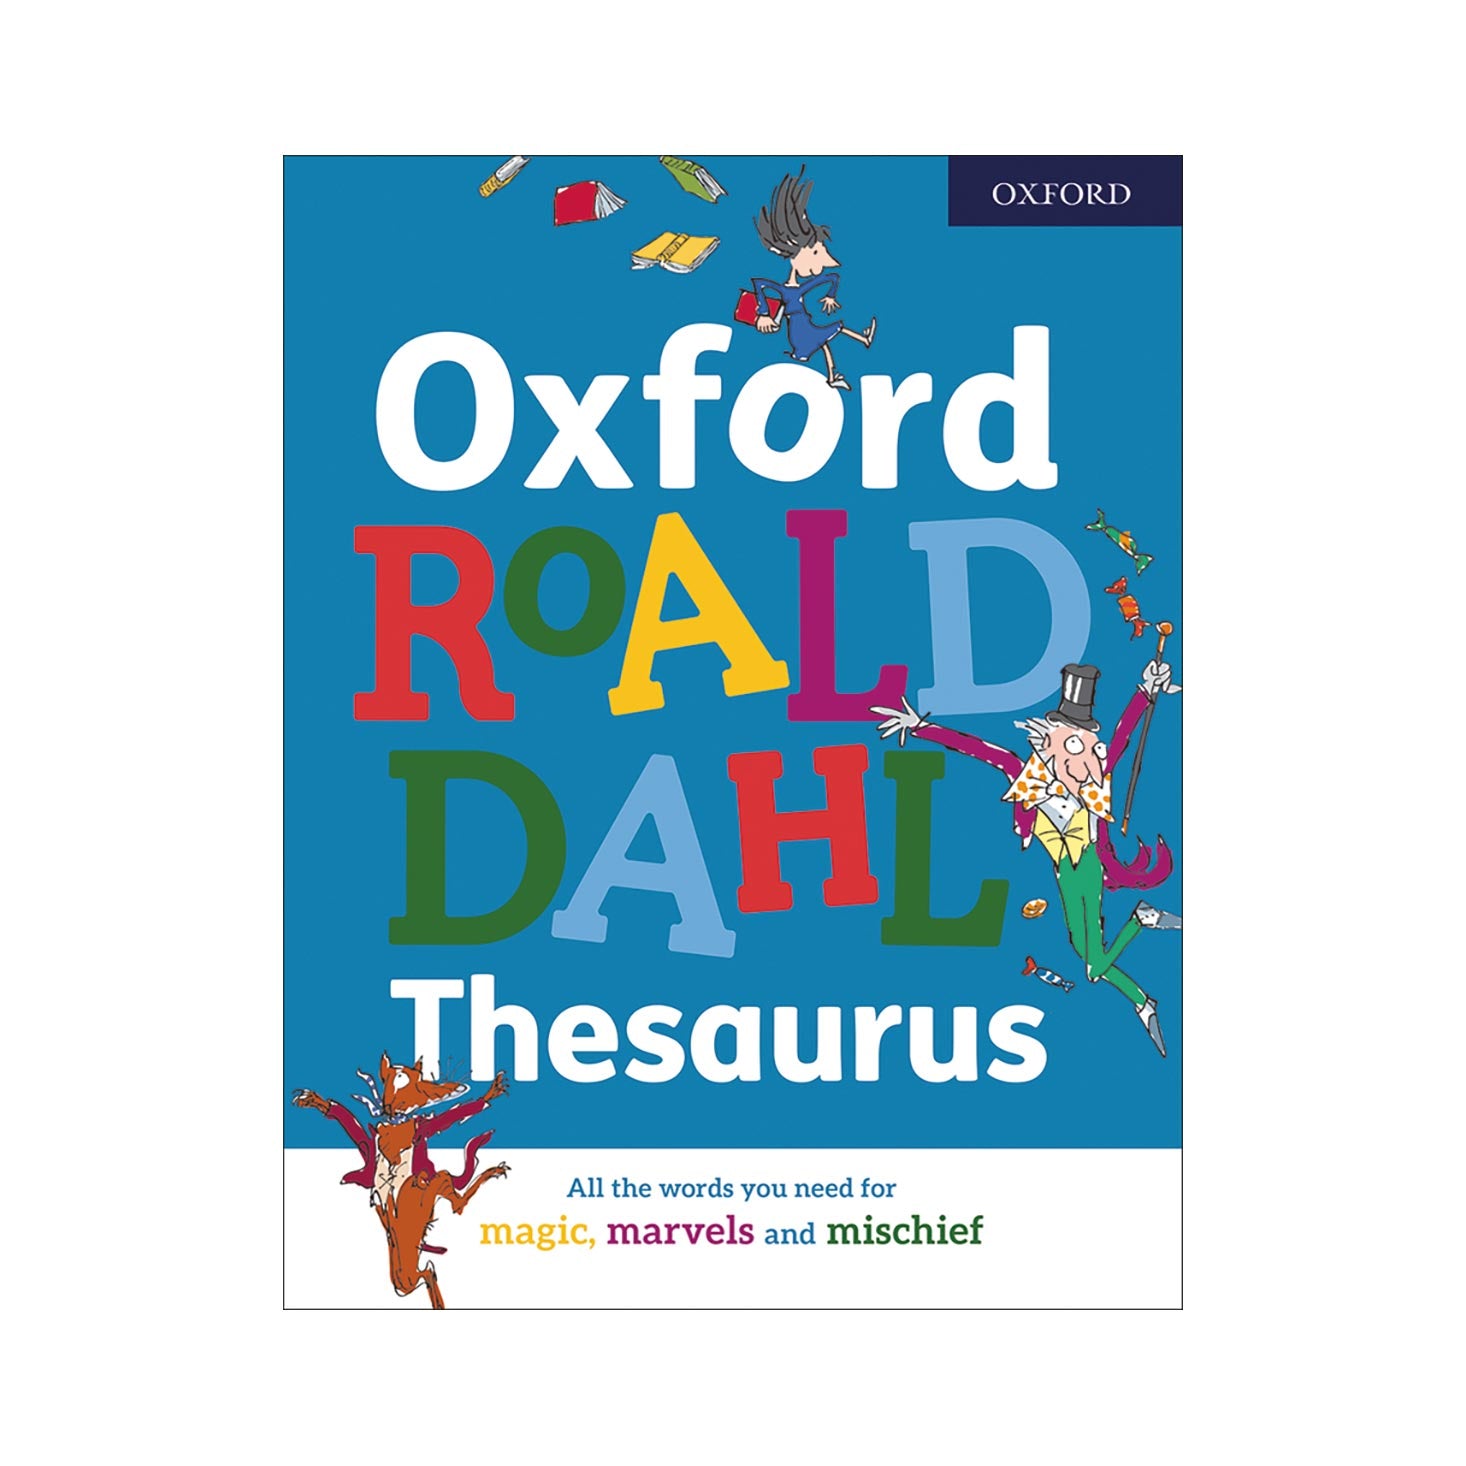 Oxford Roald Dahl Thesaurus, using words based on Road Dahl's stories and featuring illustrations by Quentin Blake